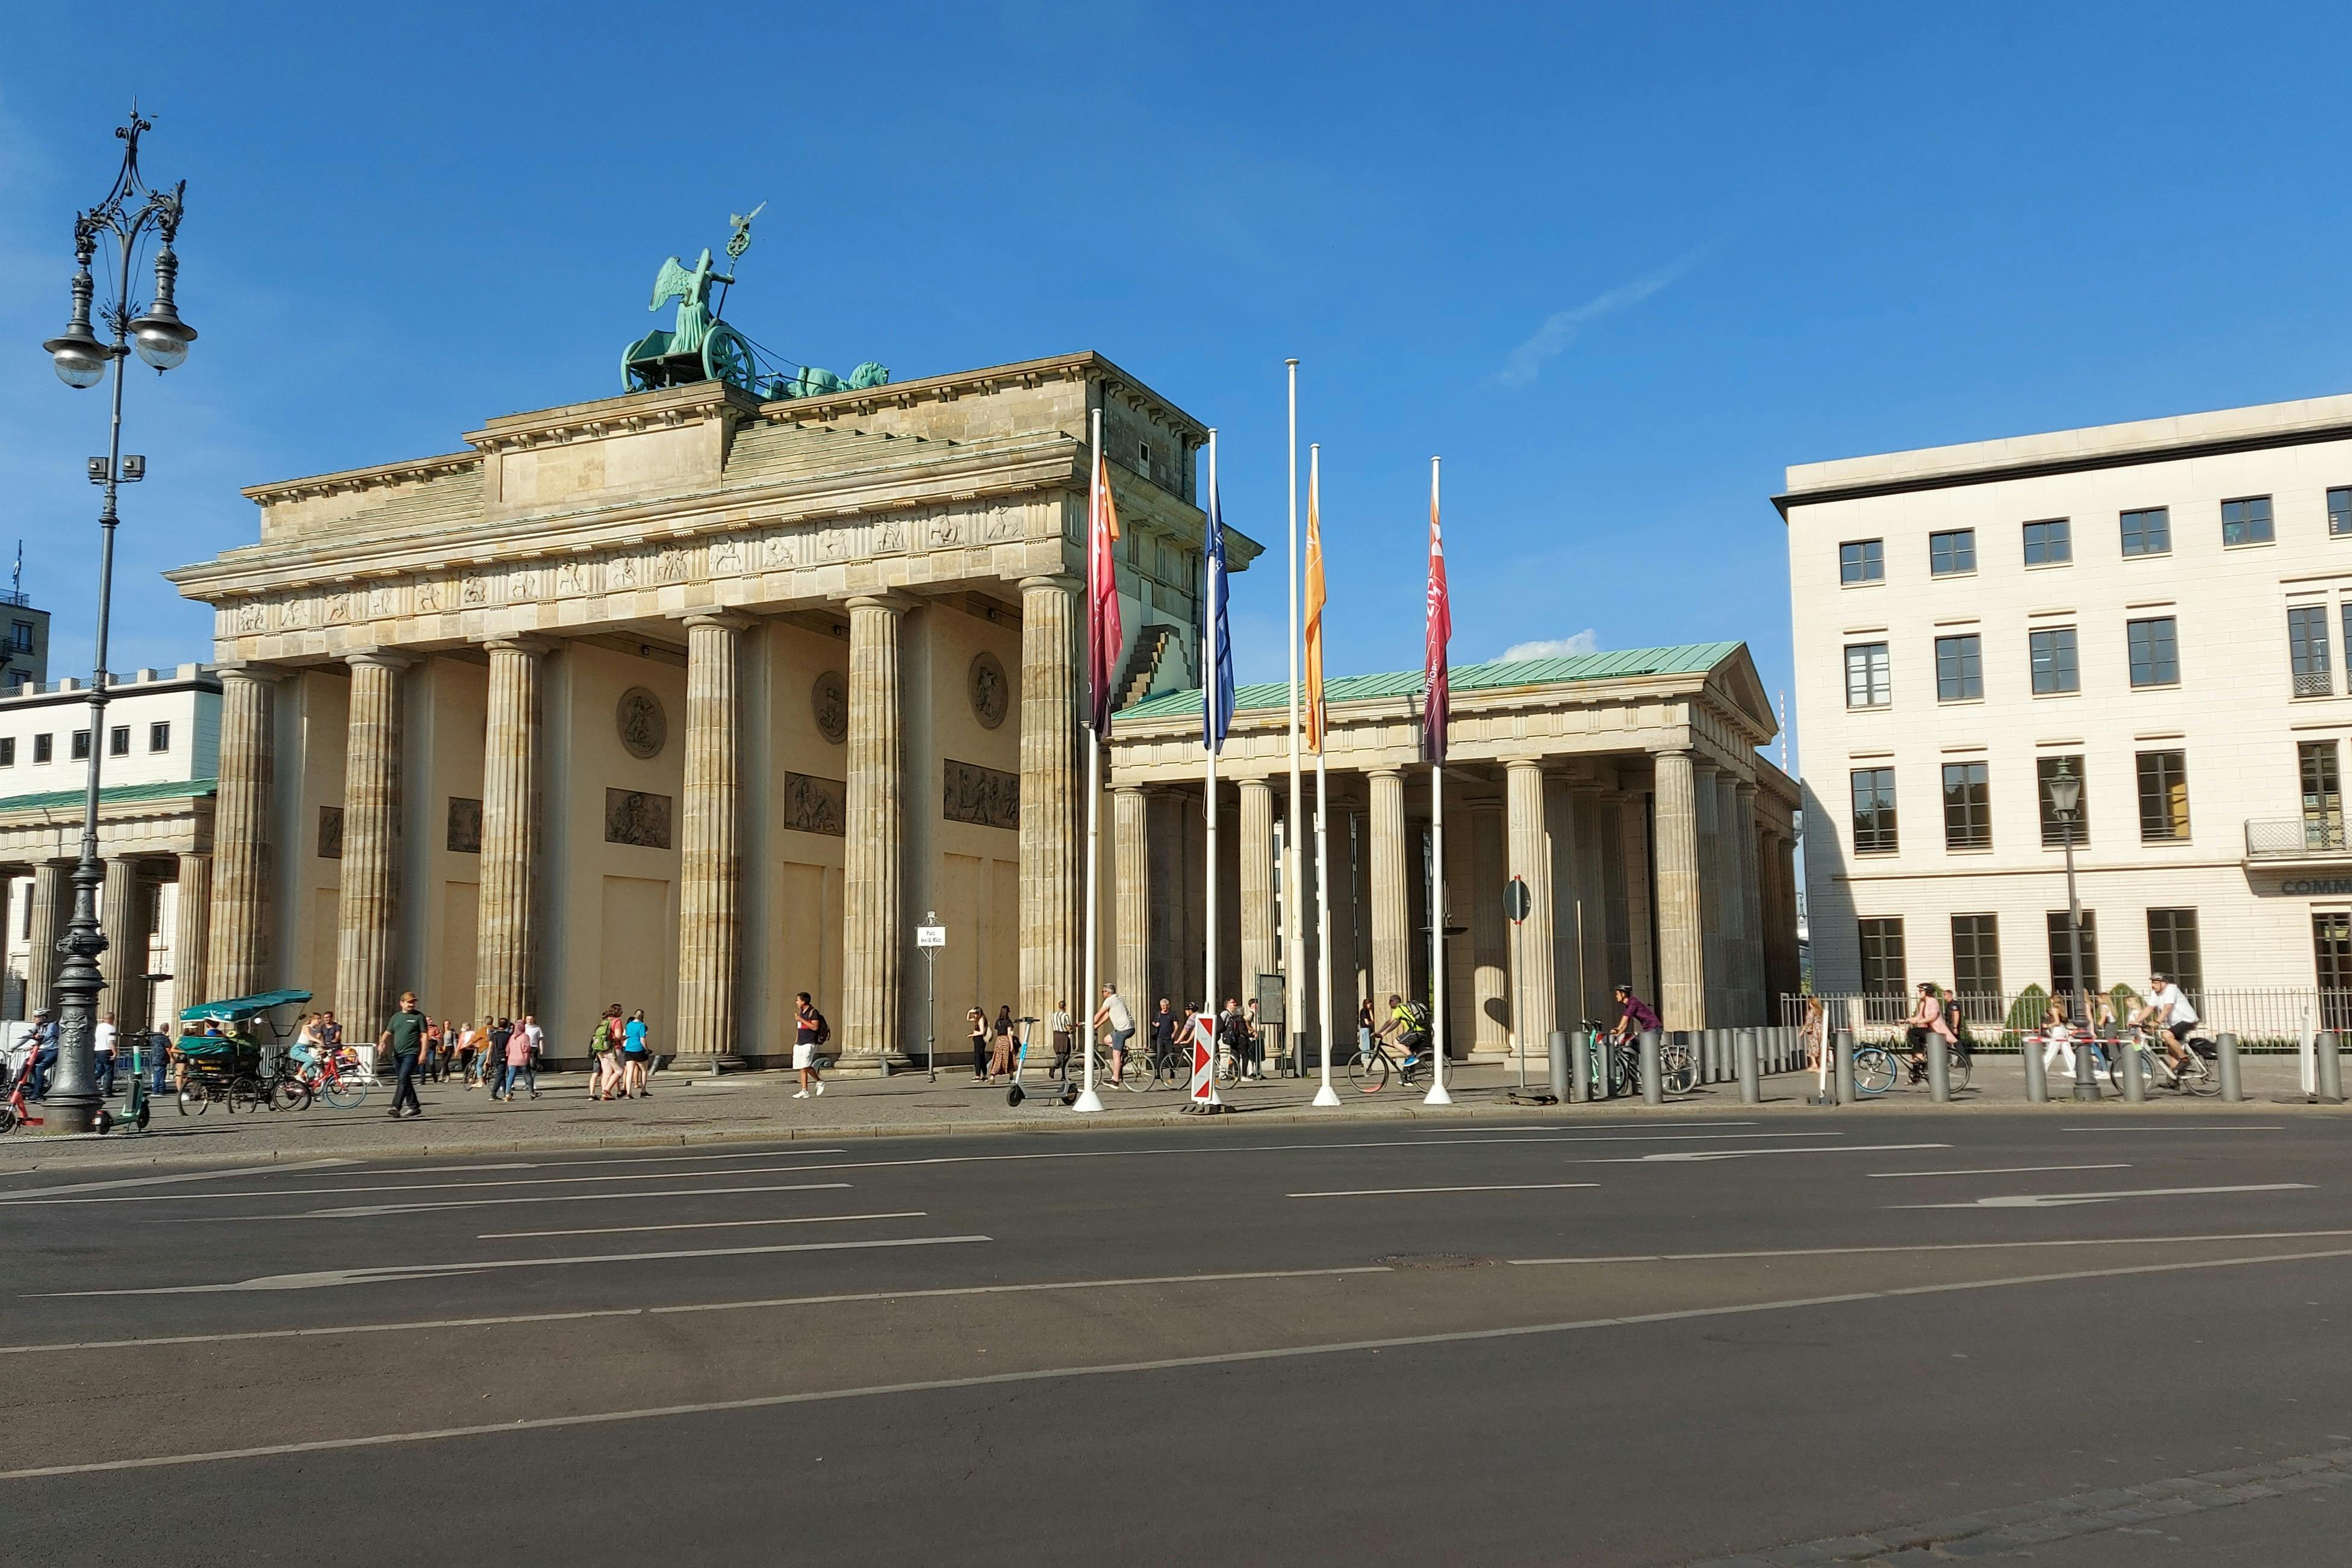 Always along the wall - from Checkpoint Charlie to the Brandenburg Gate